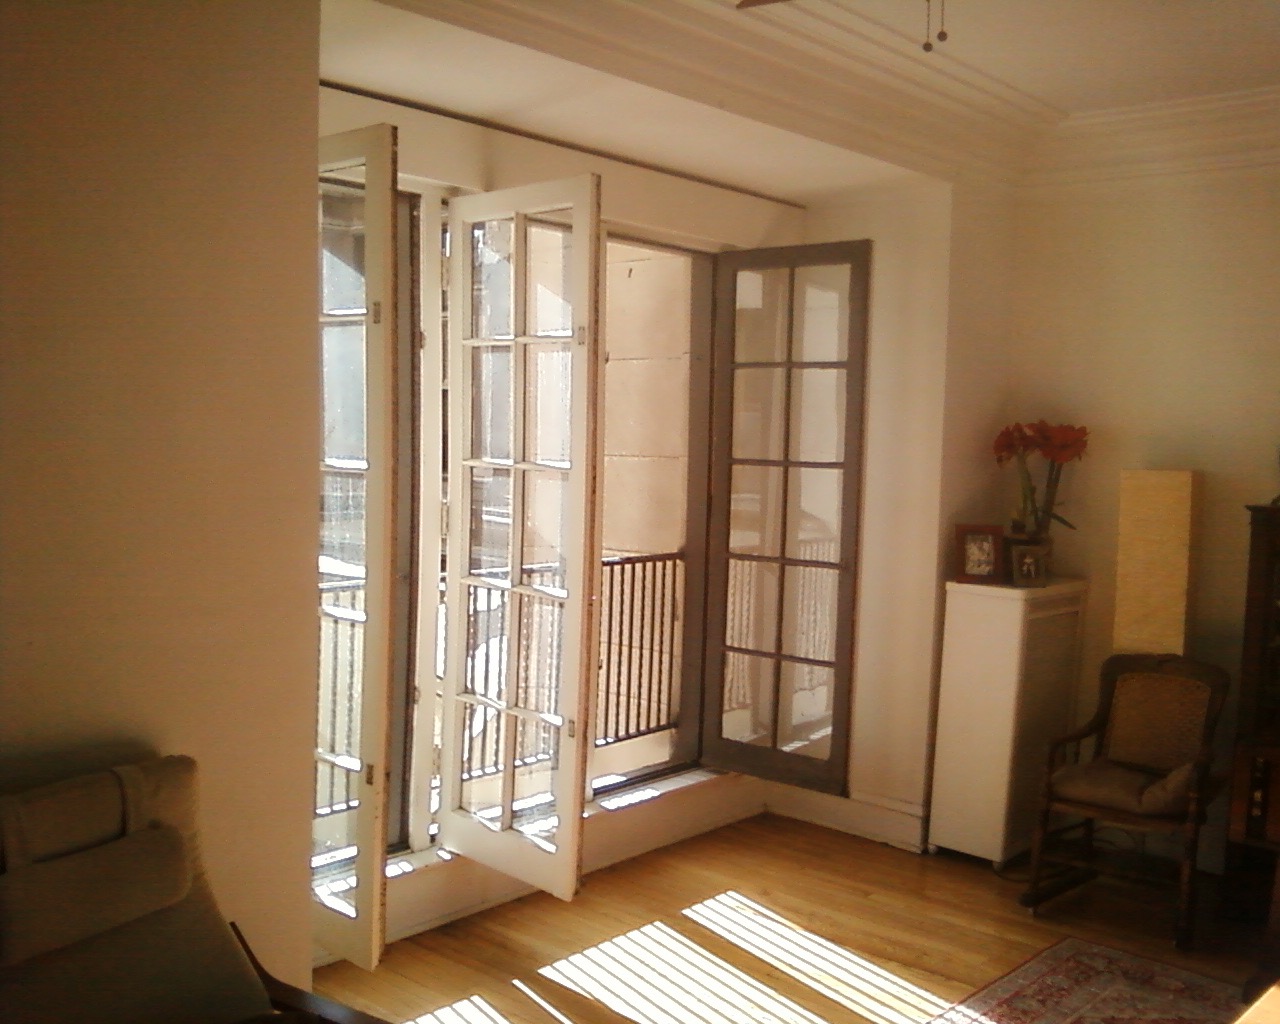 I am extremely pleased with the work that Jeff Ediger did in rehabbing my 85-year-old French doors.